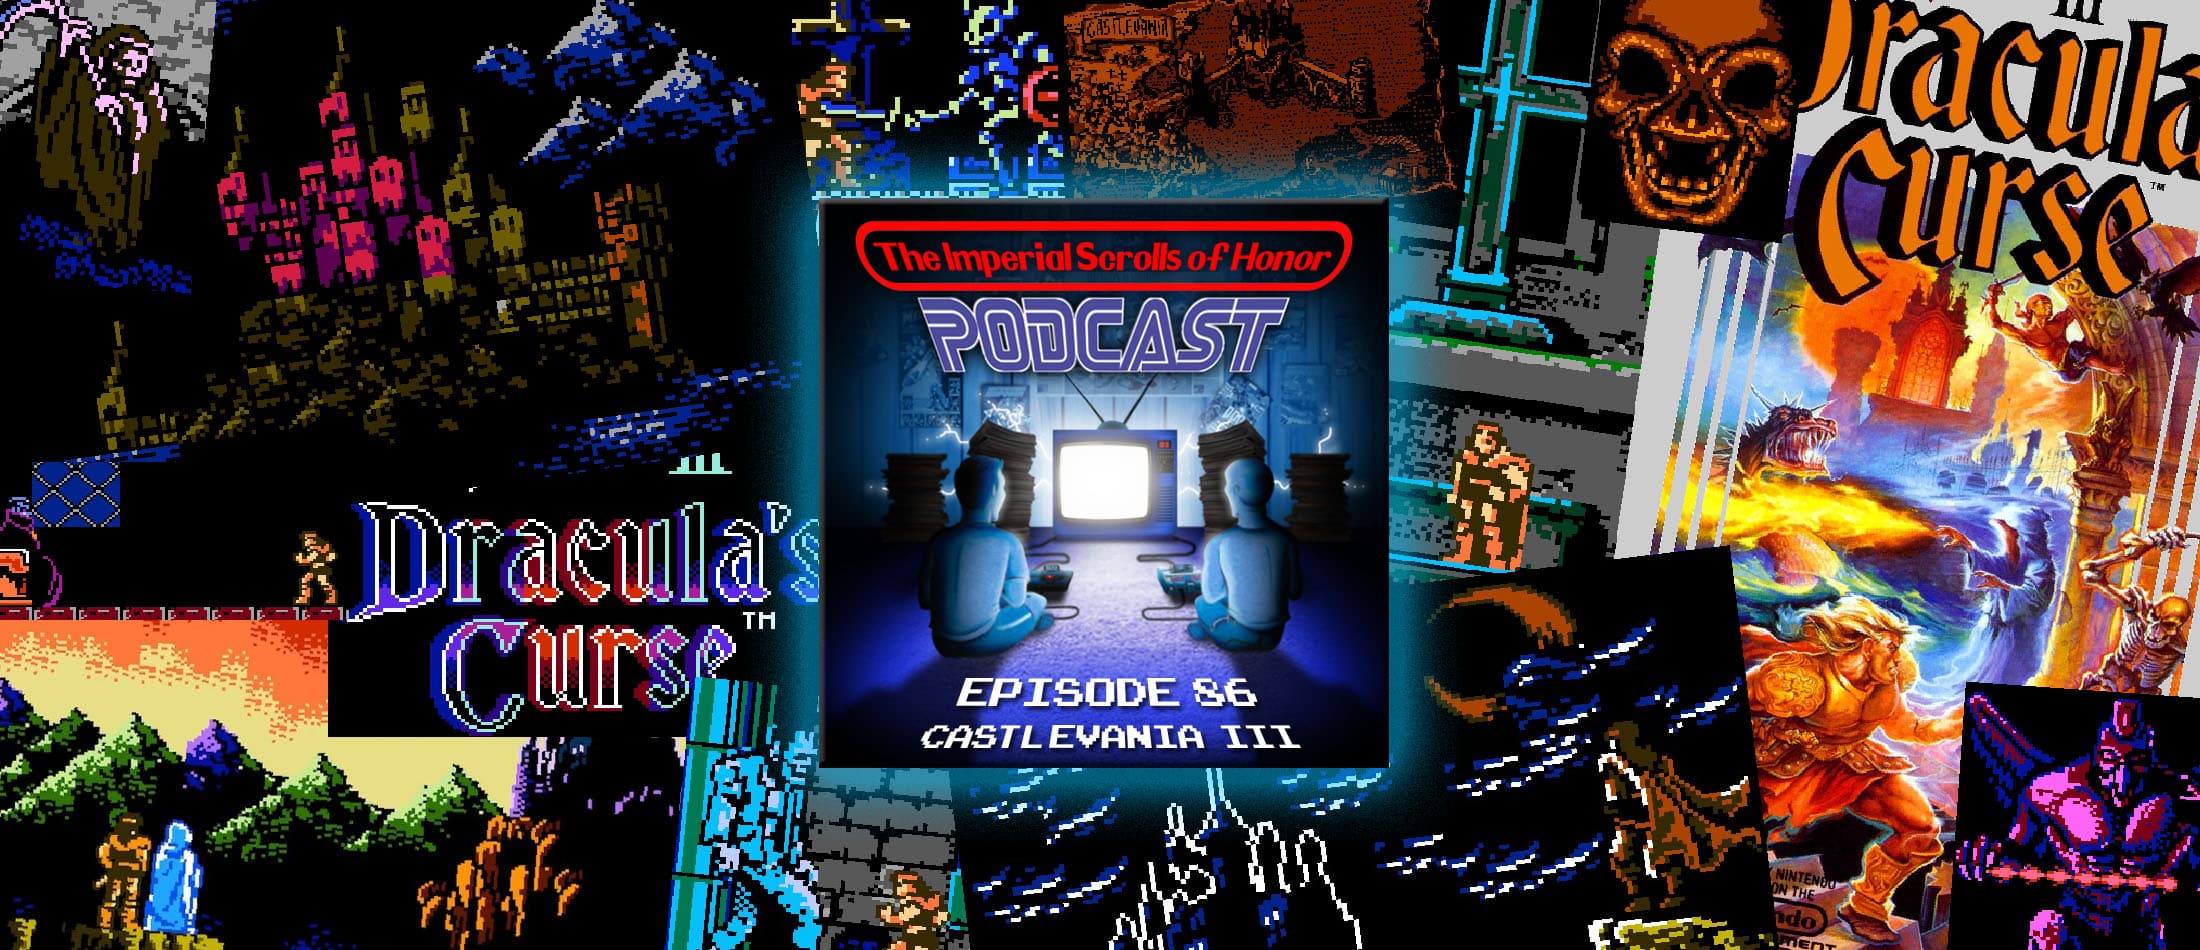 The Imperial Scrolls of Honor Podcast - Ep 86 - Castlevania III: Dracula’s Curse (NES)